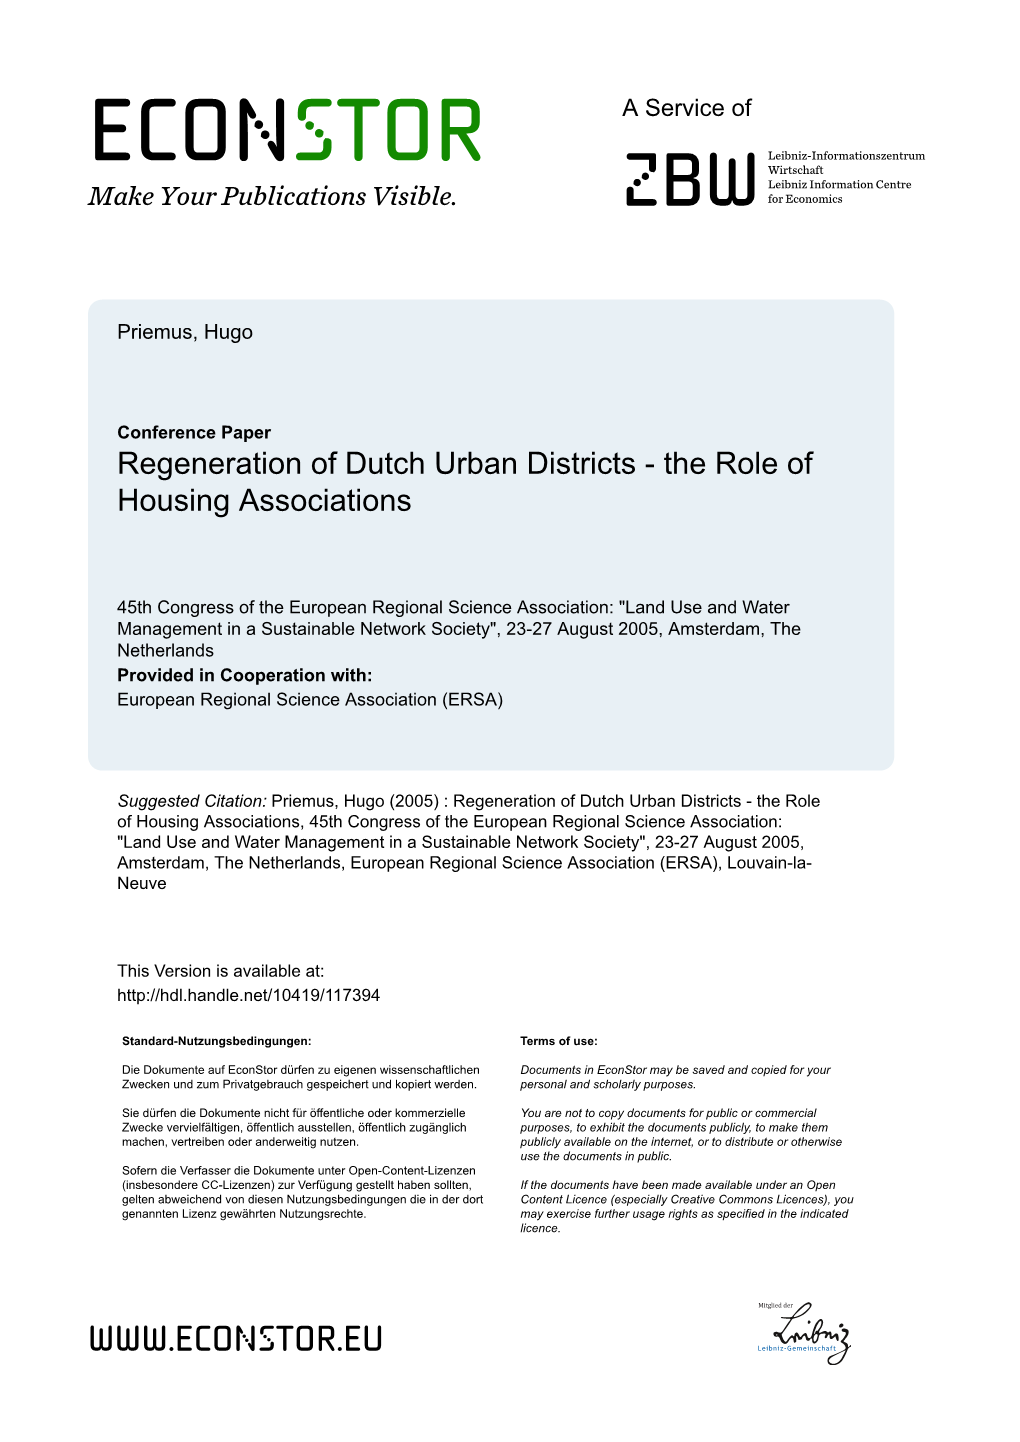 Regeneration of Dutch Urban Districts - the Role of Housing Associations